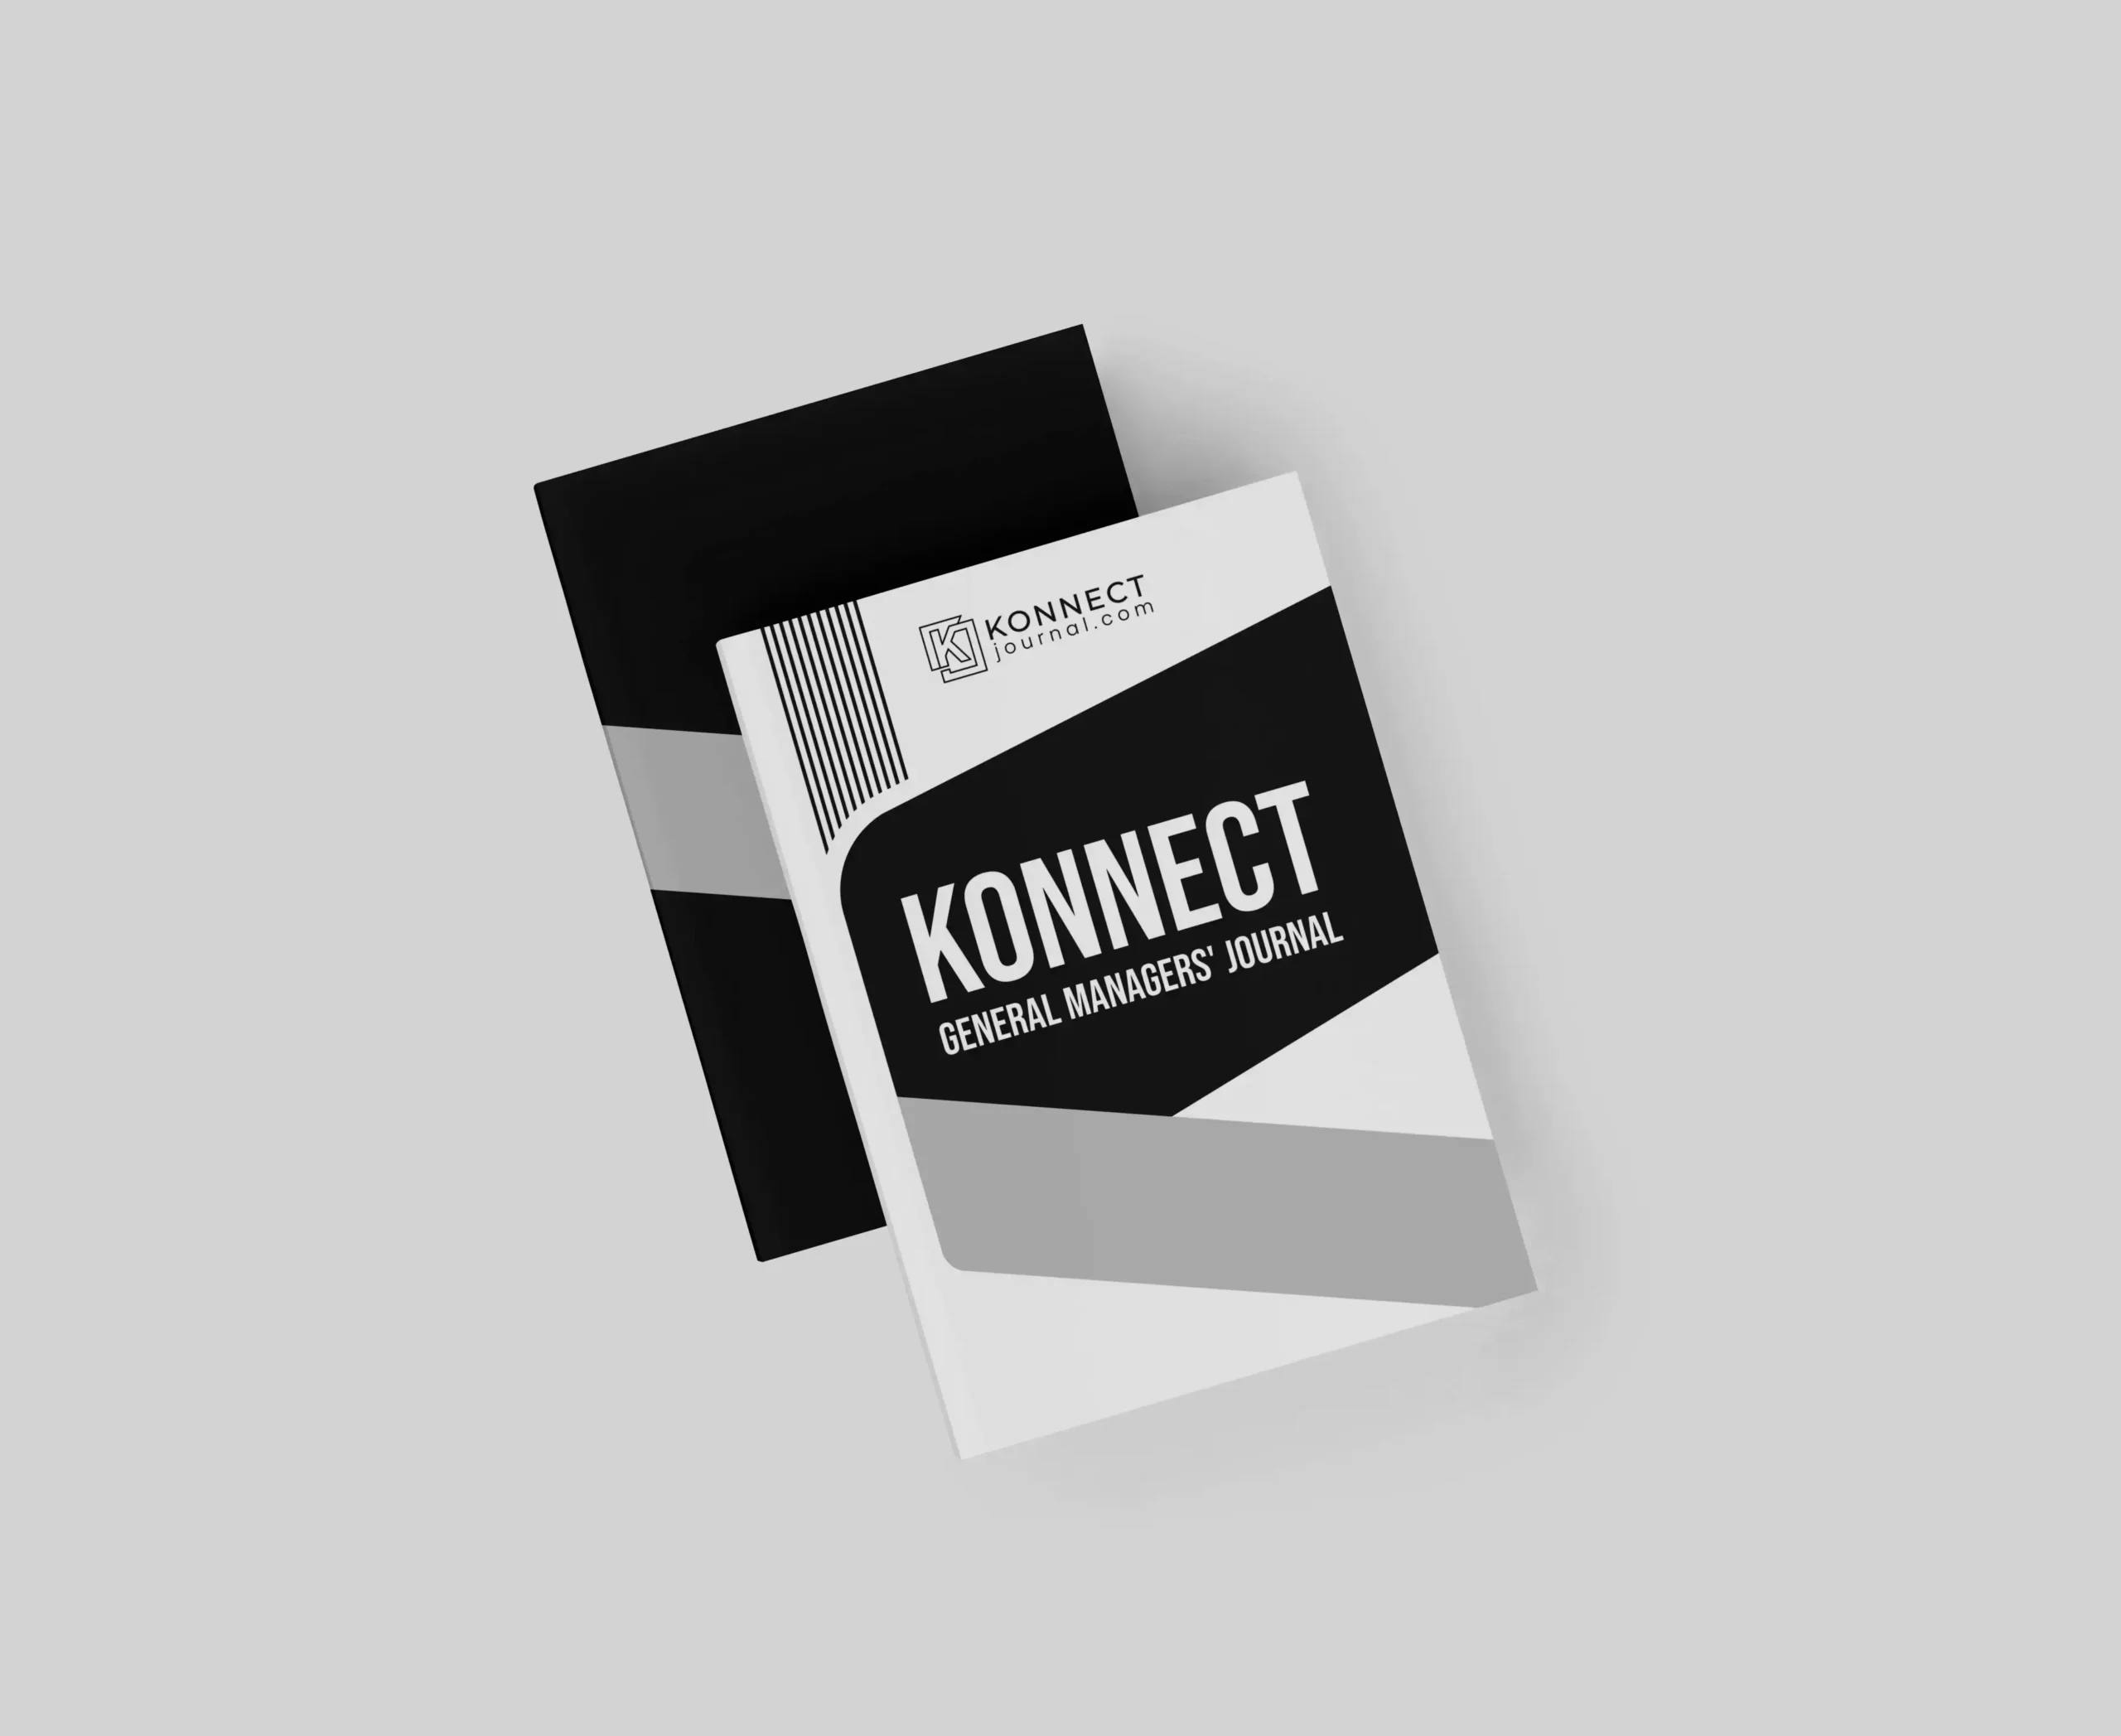 Konnect General Managers' Journal